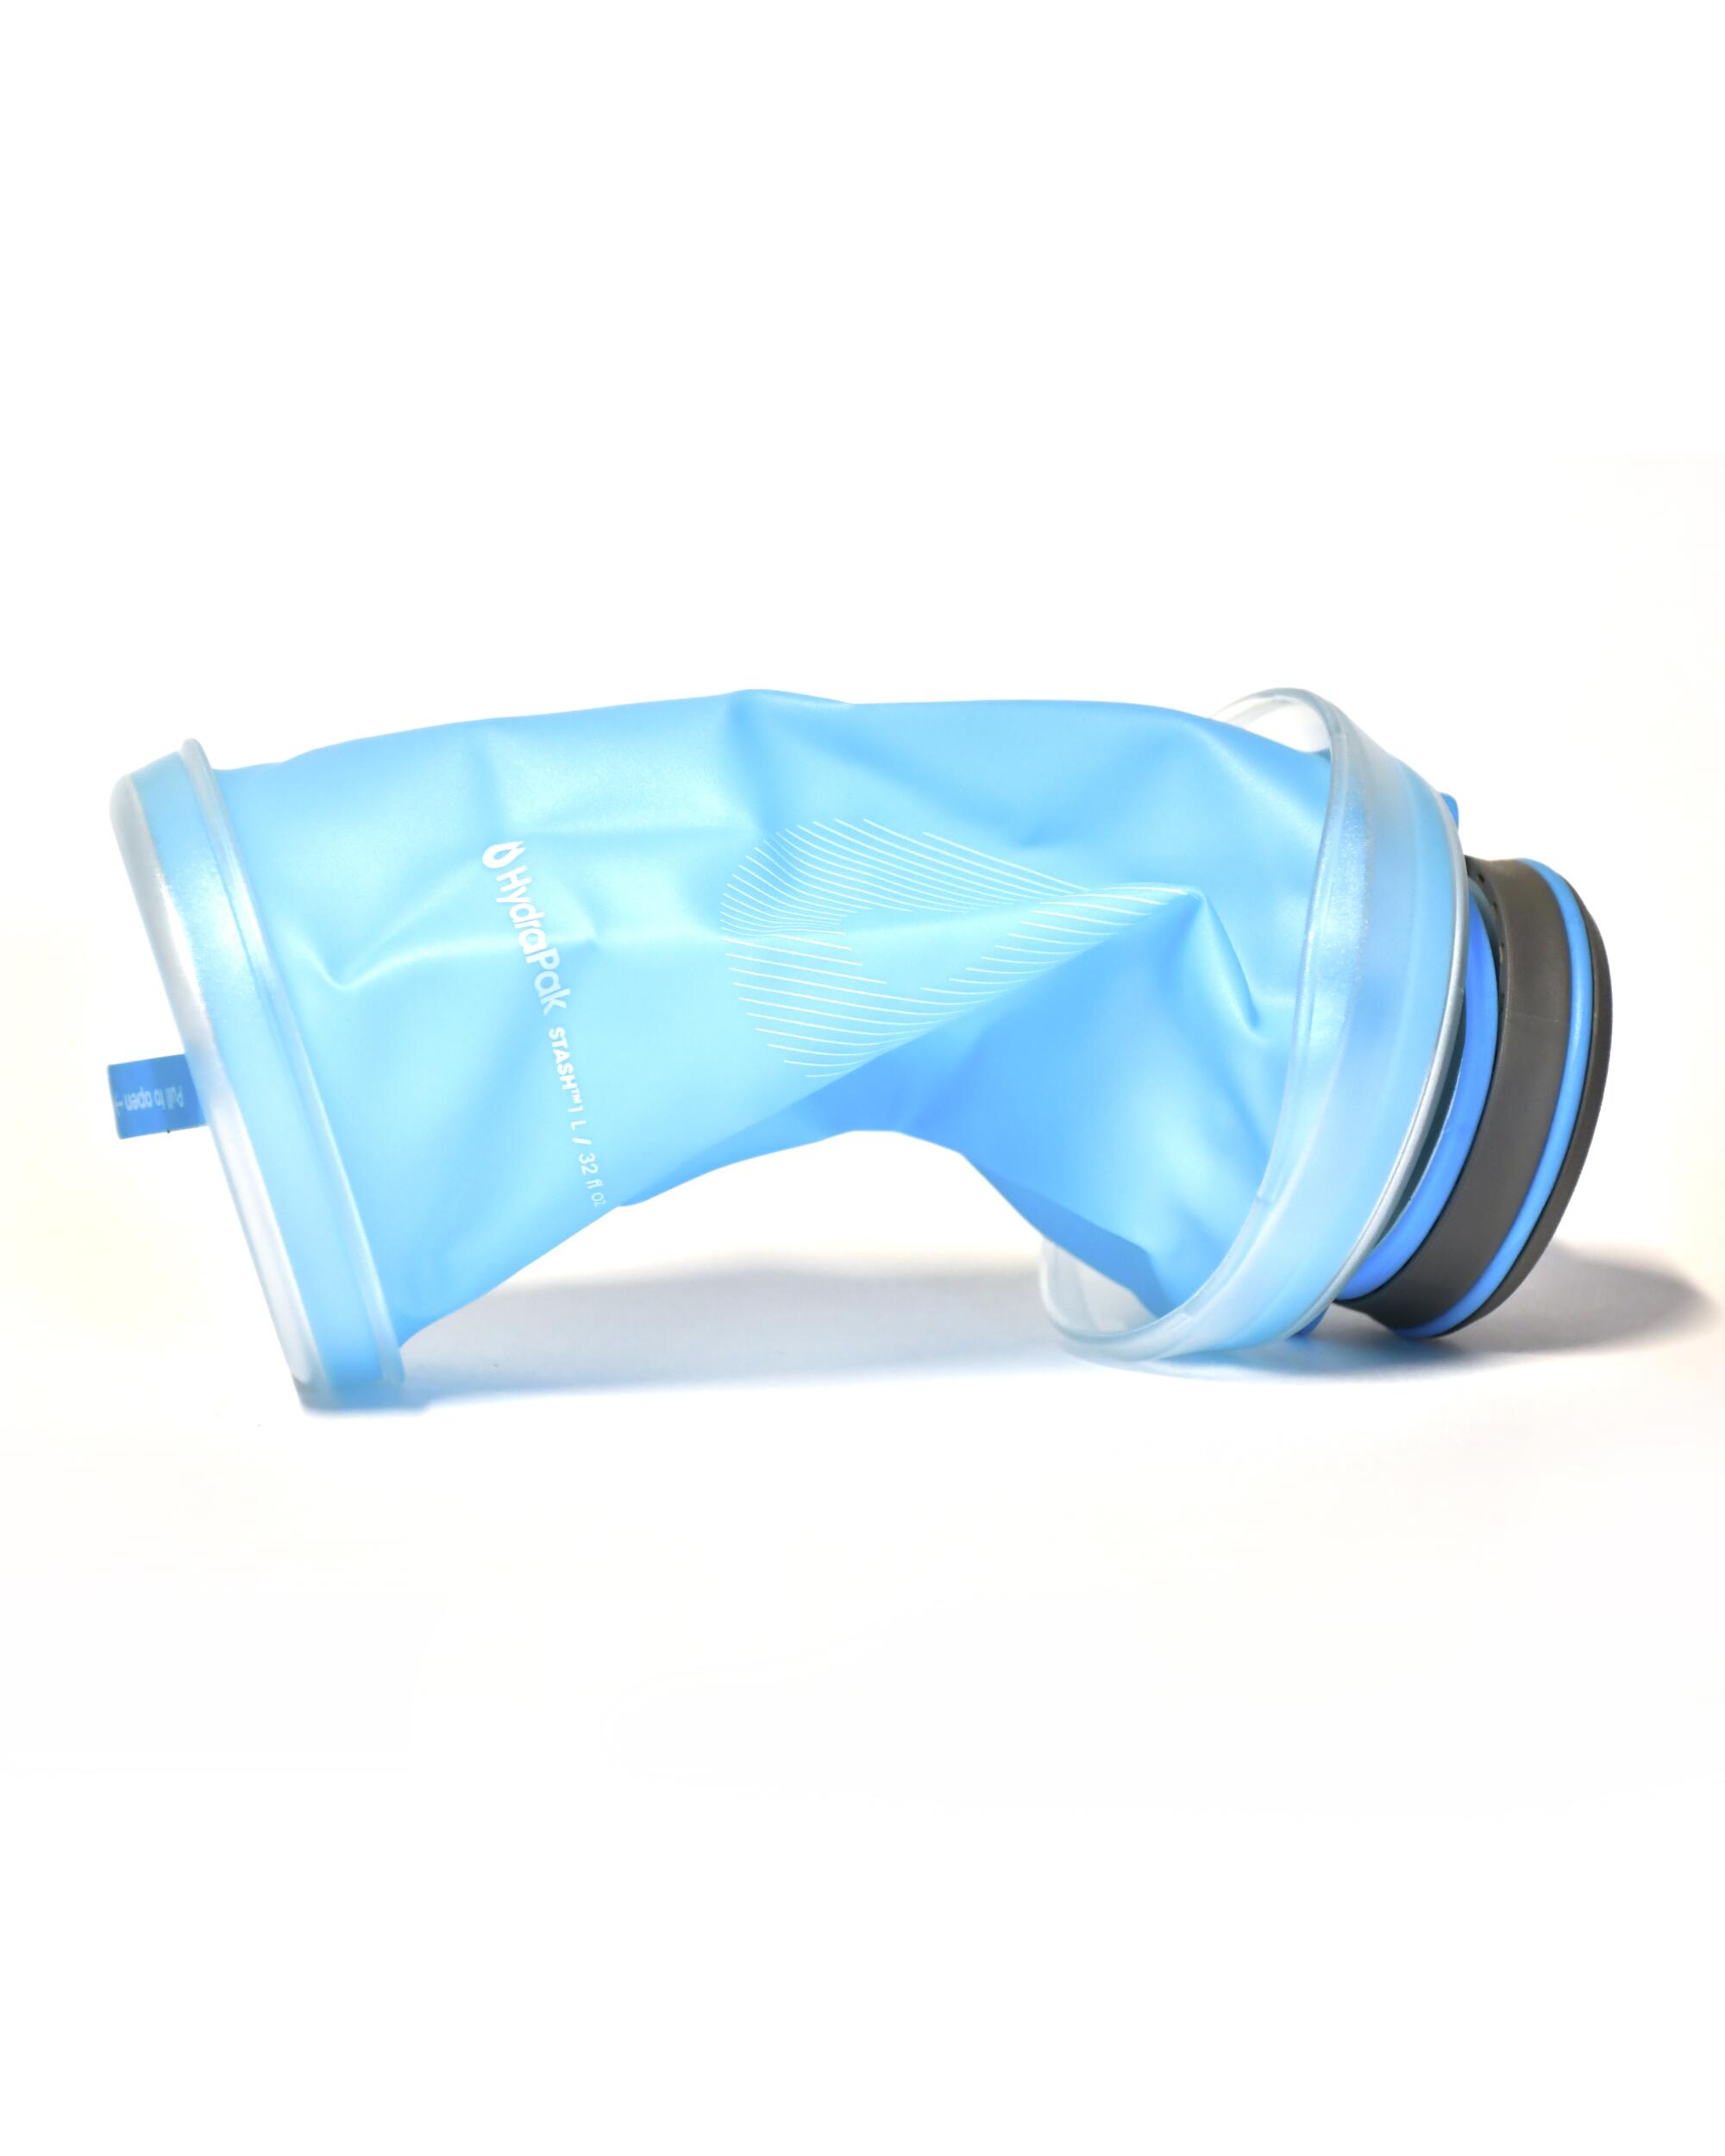 Hydrapak Stash, a 1-liter collapsible water bottle